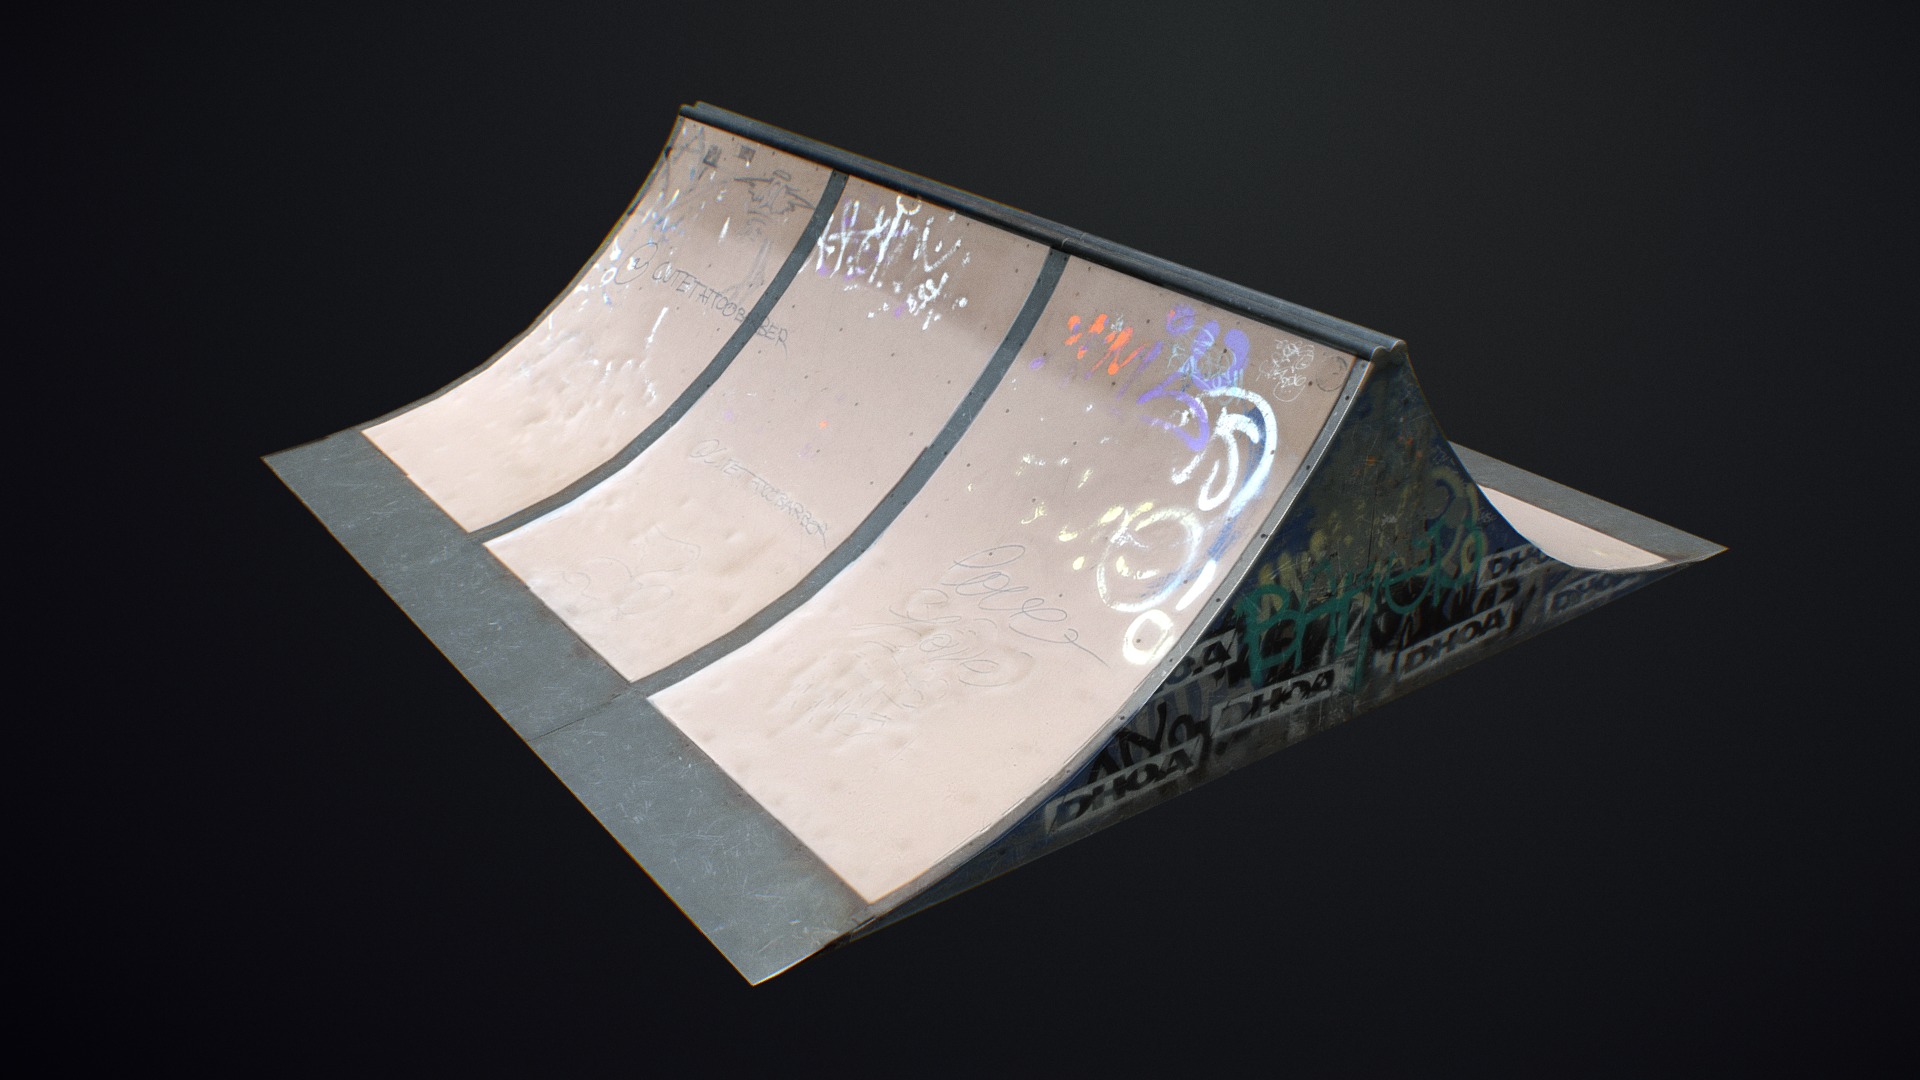 3D model Quarterpipe skate ramp - This is a 3D model of the Quarterpipe skate ramp. The 3D model is about a close-up of a broken book.